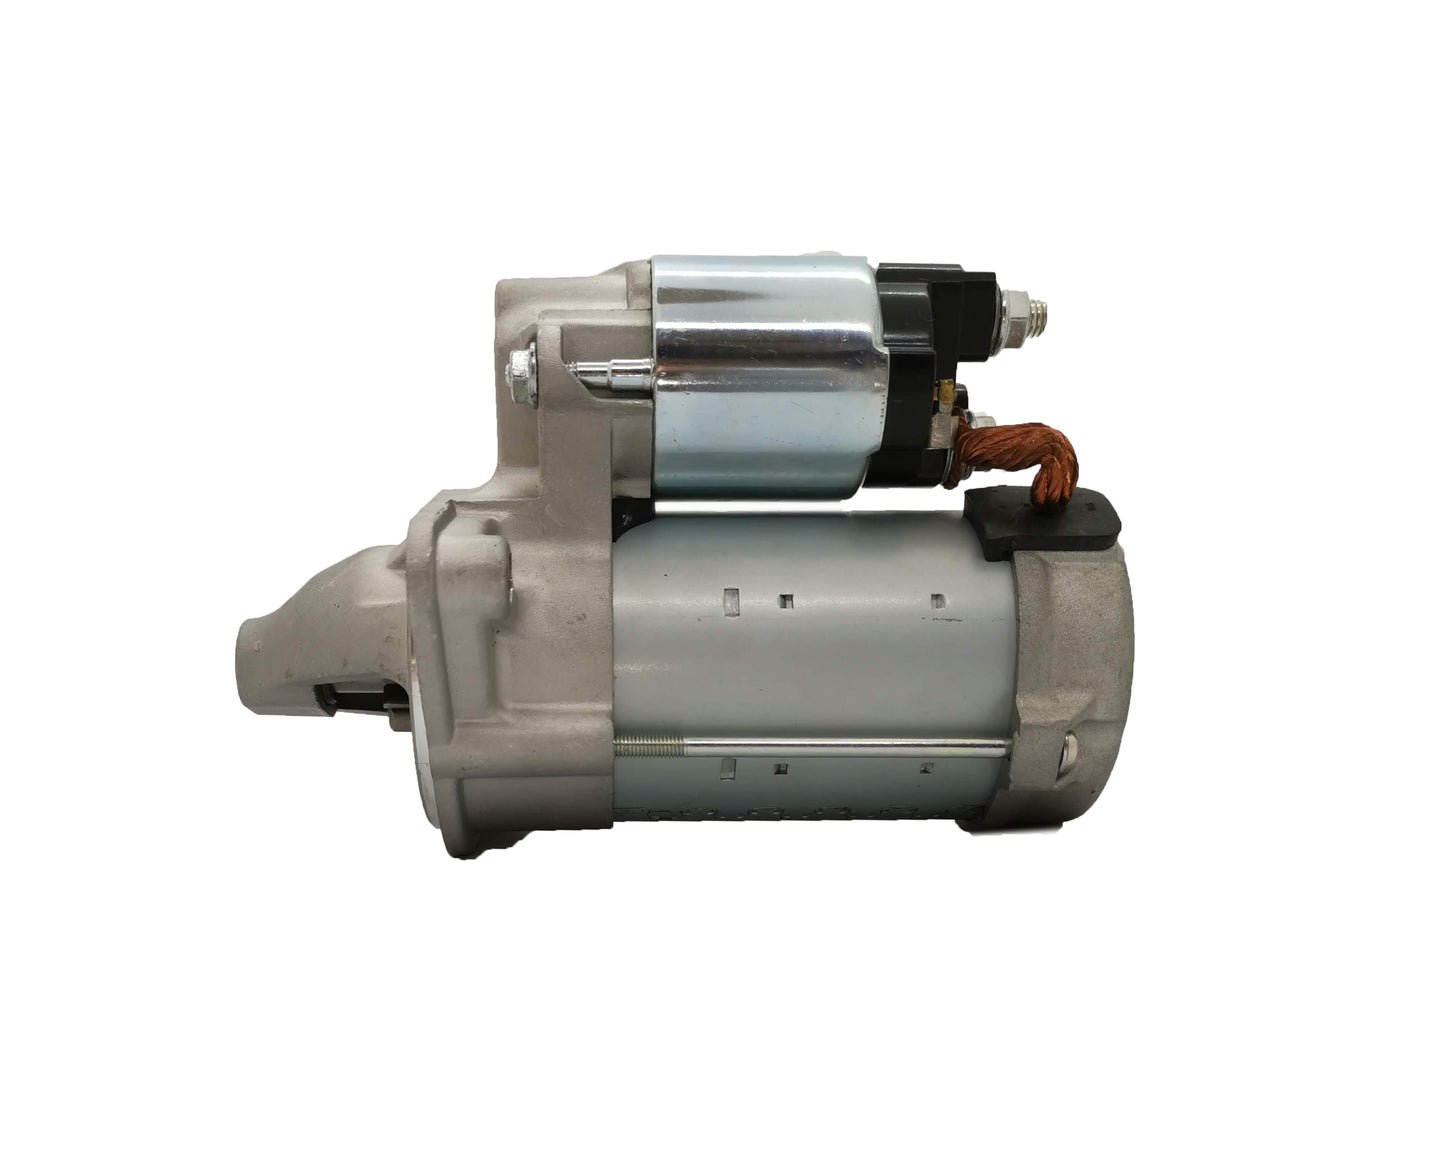 Have one to sell? Sell it yourself New Starter Motor for Toyota Corolla ZRE152R 172R 182R 1.8L 2ZR-FE 2007-2016